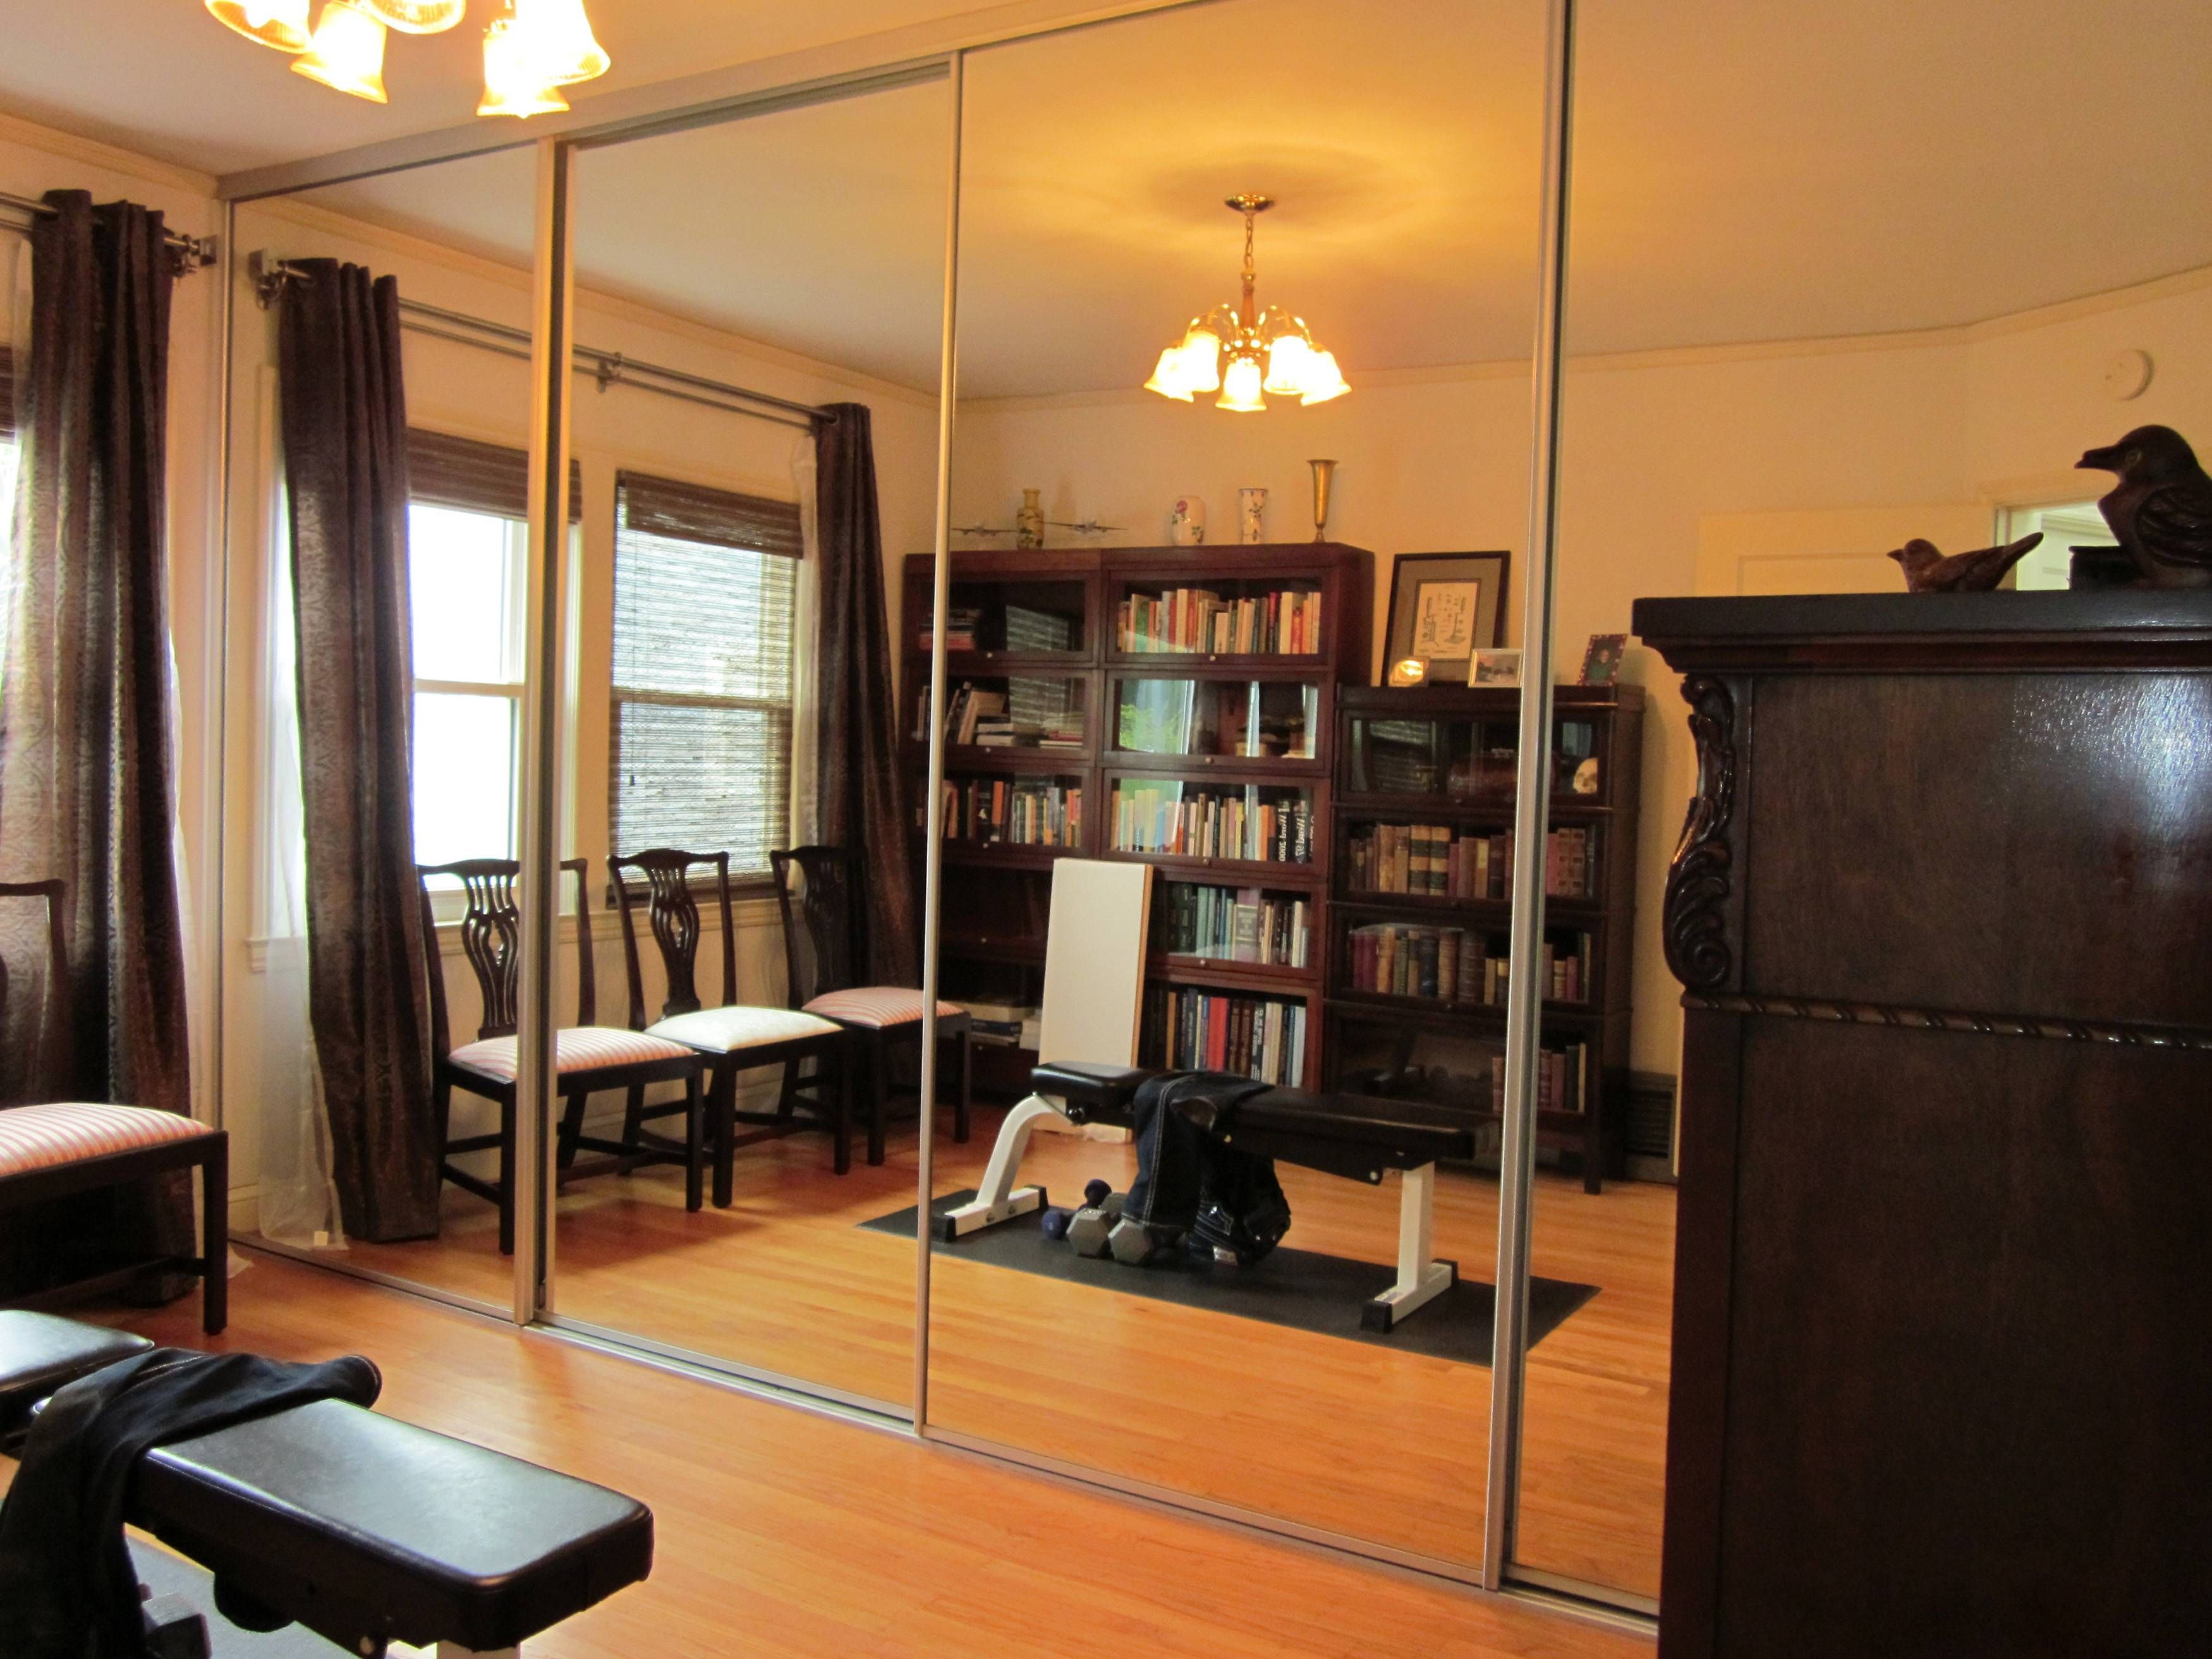 Living Room With Floor To Ceiling Mirror (View 7 of 25)